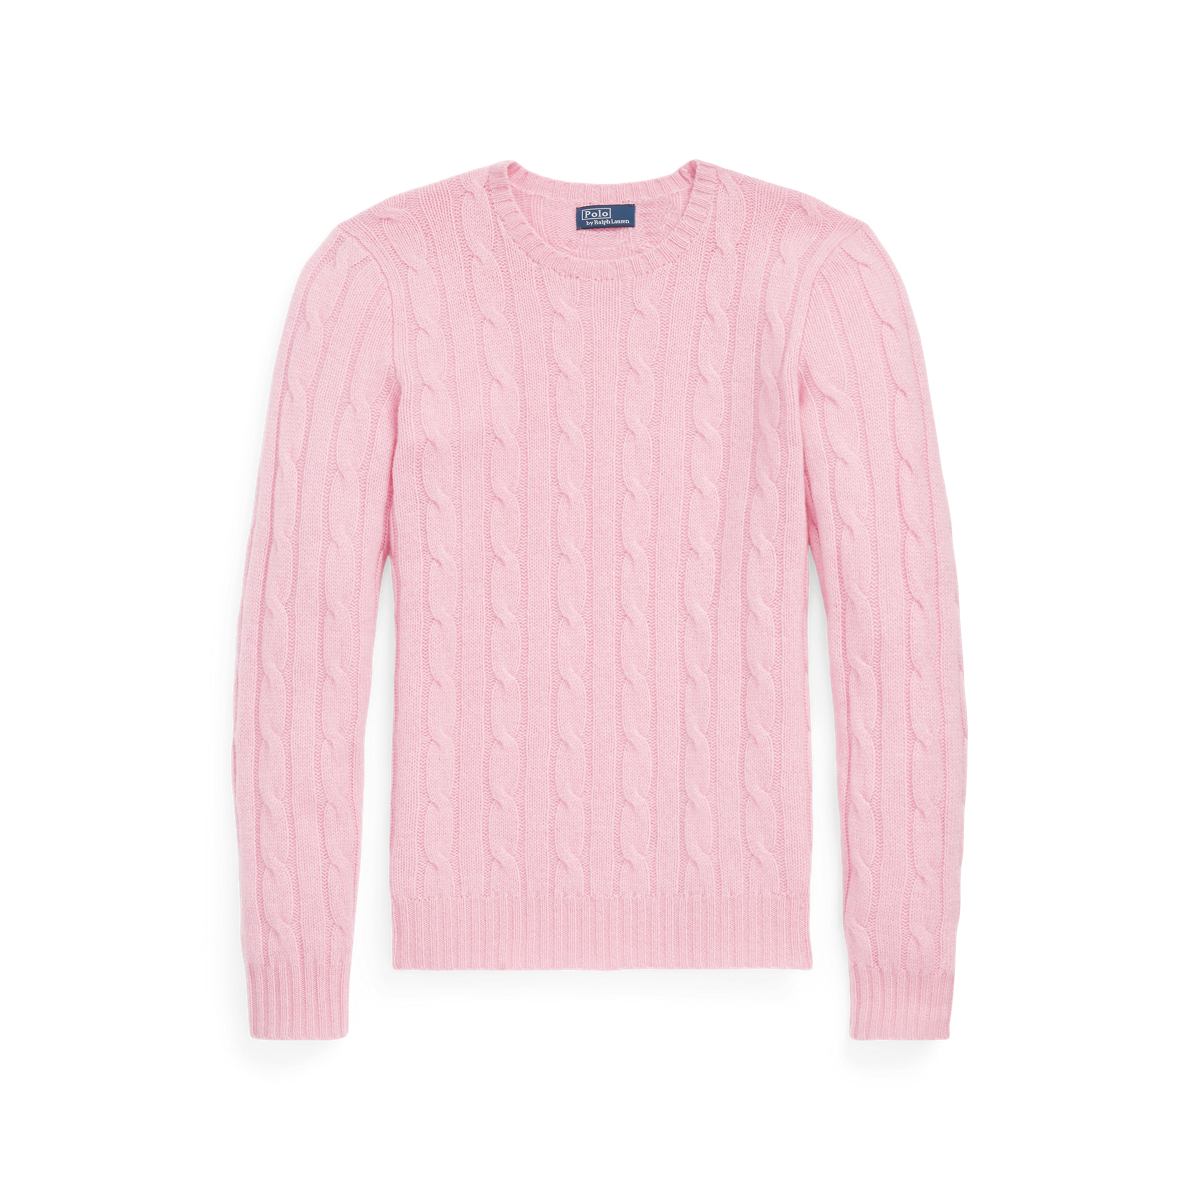 Ralph Lauren Women's Cable-Knit Cashmere Sweater - Size XS in Carmel Pink